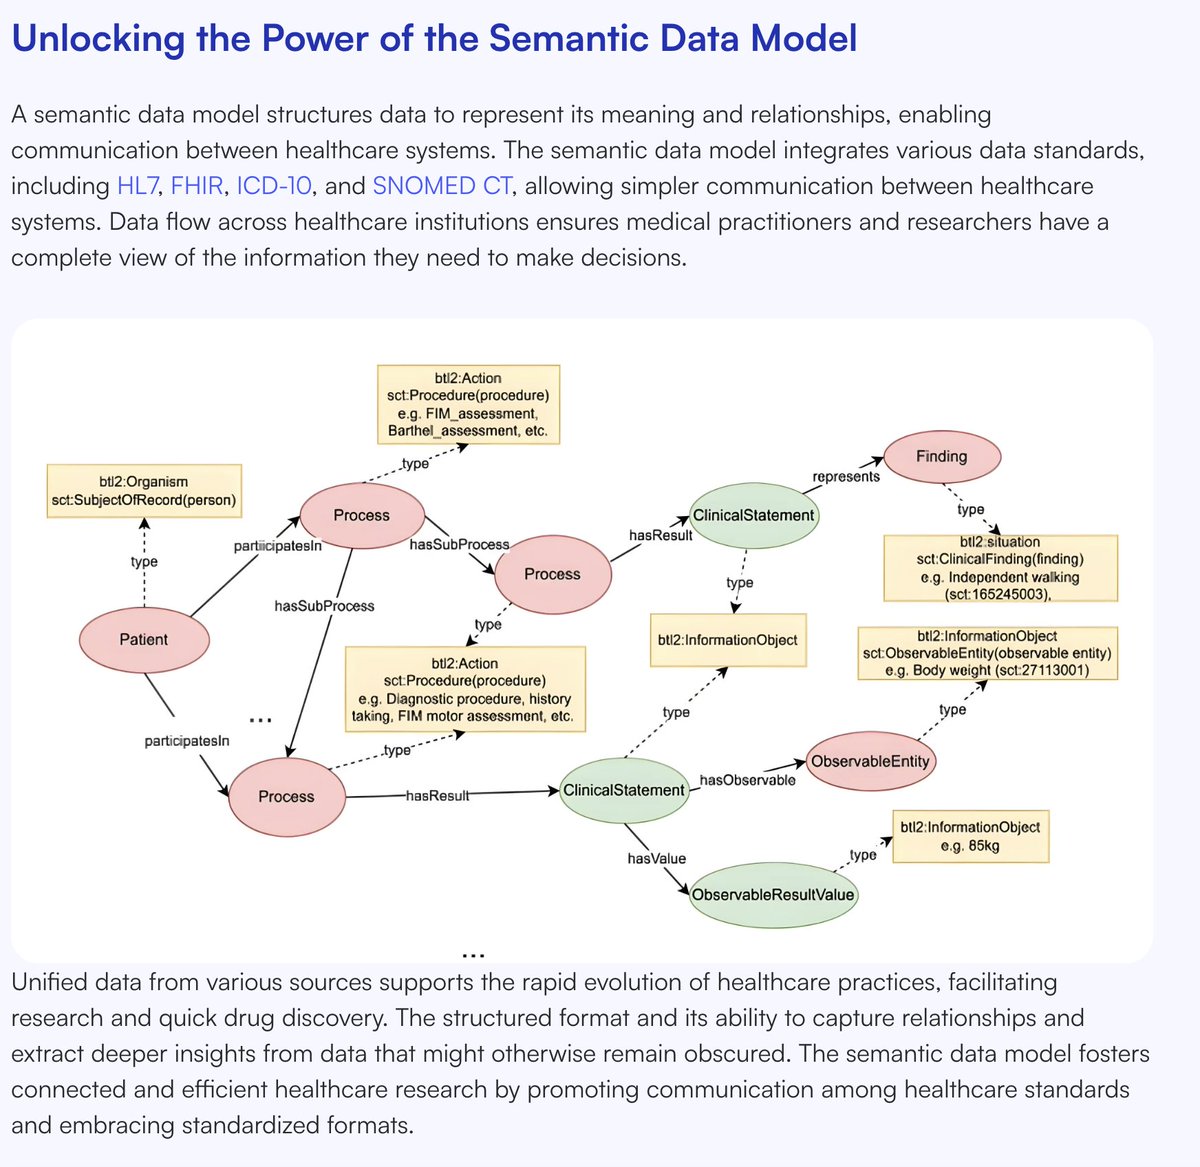 Unleashing the power of the #Semantic #DataModel or SDM! 🚀
How does it allow simpler communication between healthcare systems? By integrating various data standards, like #HL7, #FHIR, ICD-10, and #SNOMED CT.
More: bit.ly/44eSRSf